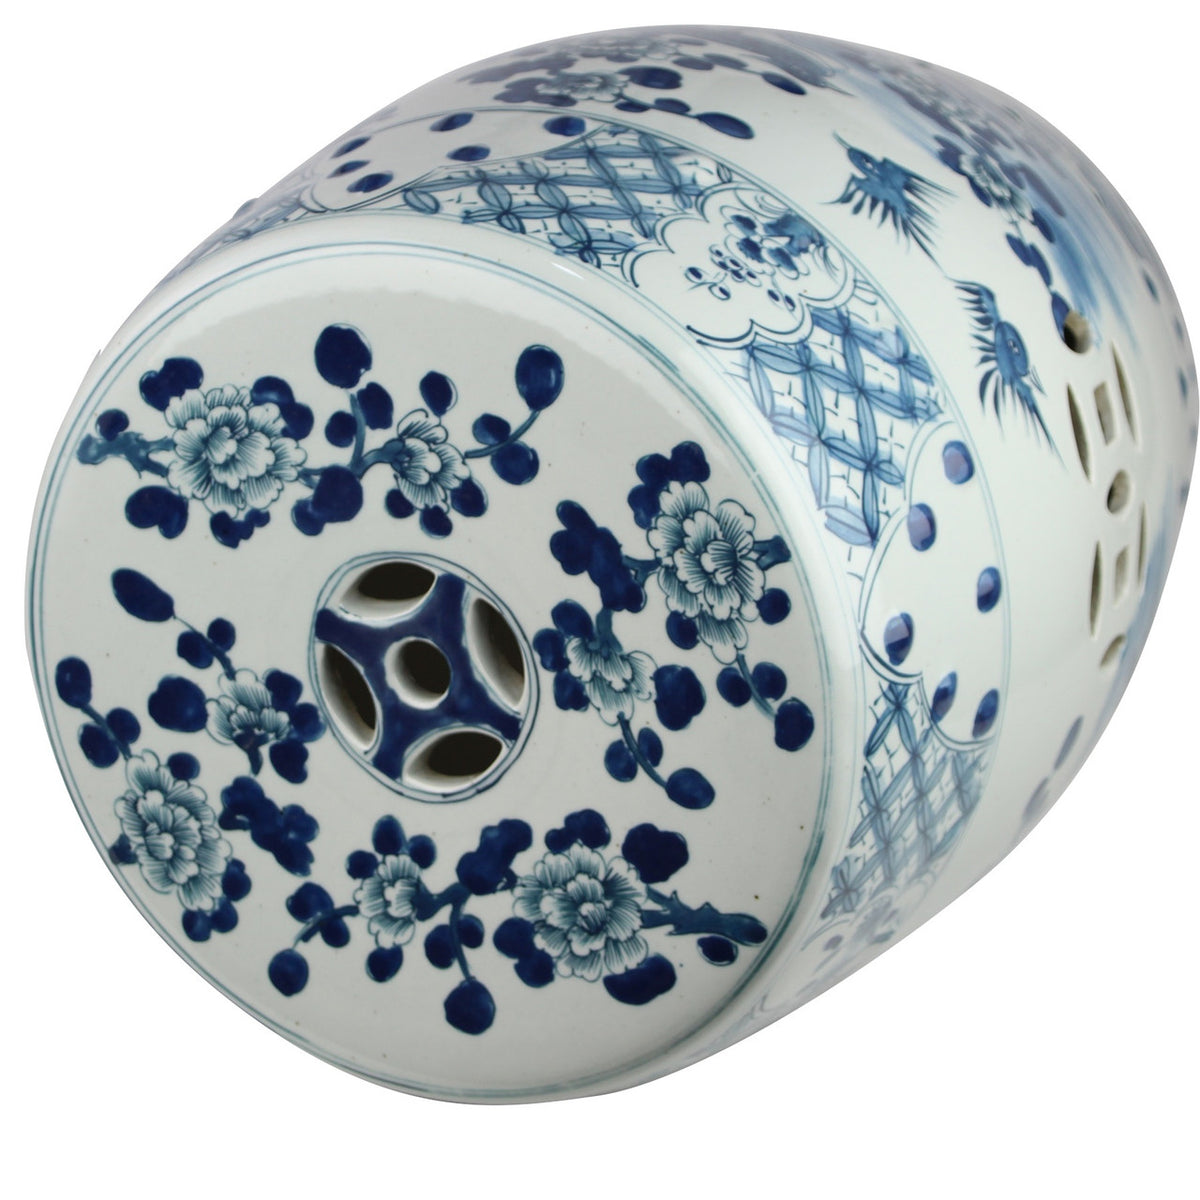 Top of blue and white chinoiserie village garden stool 